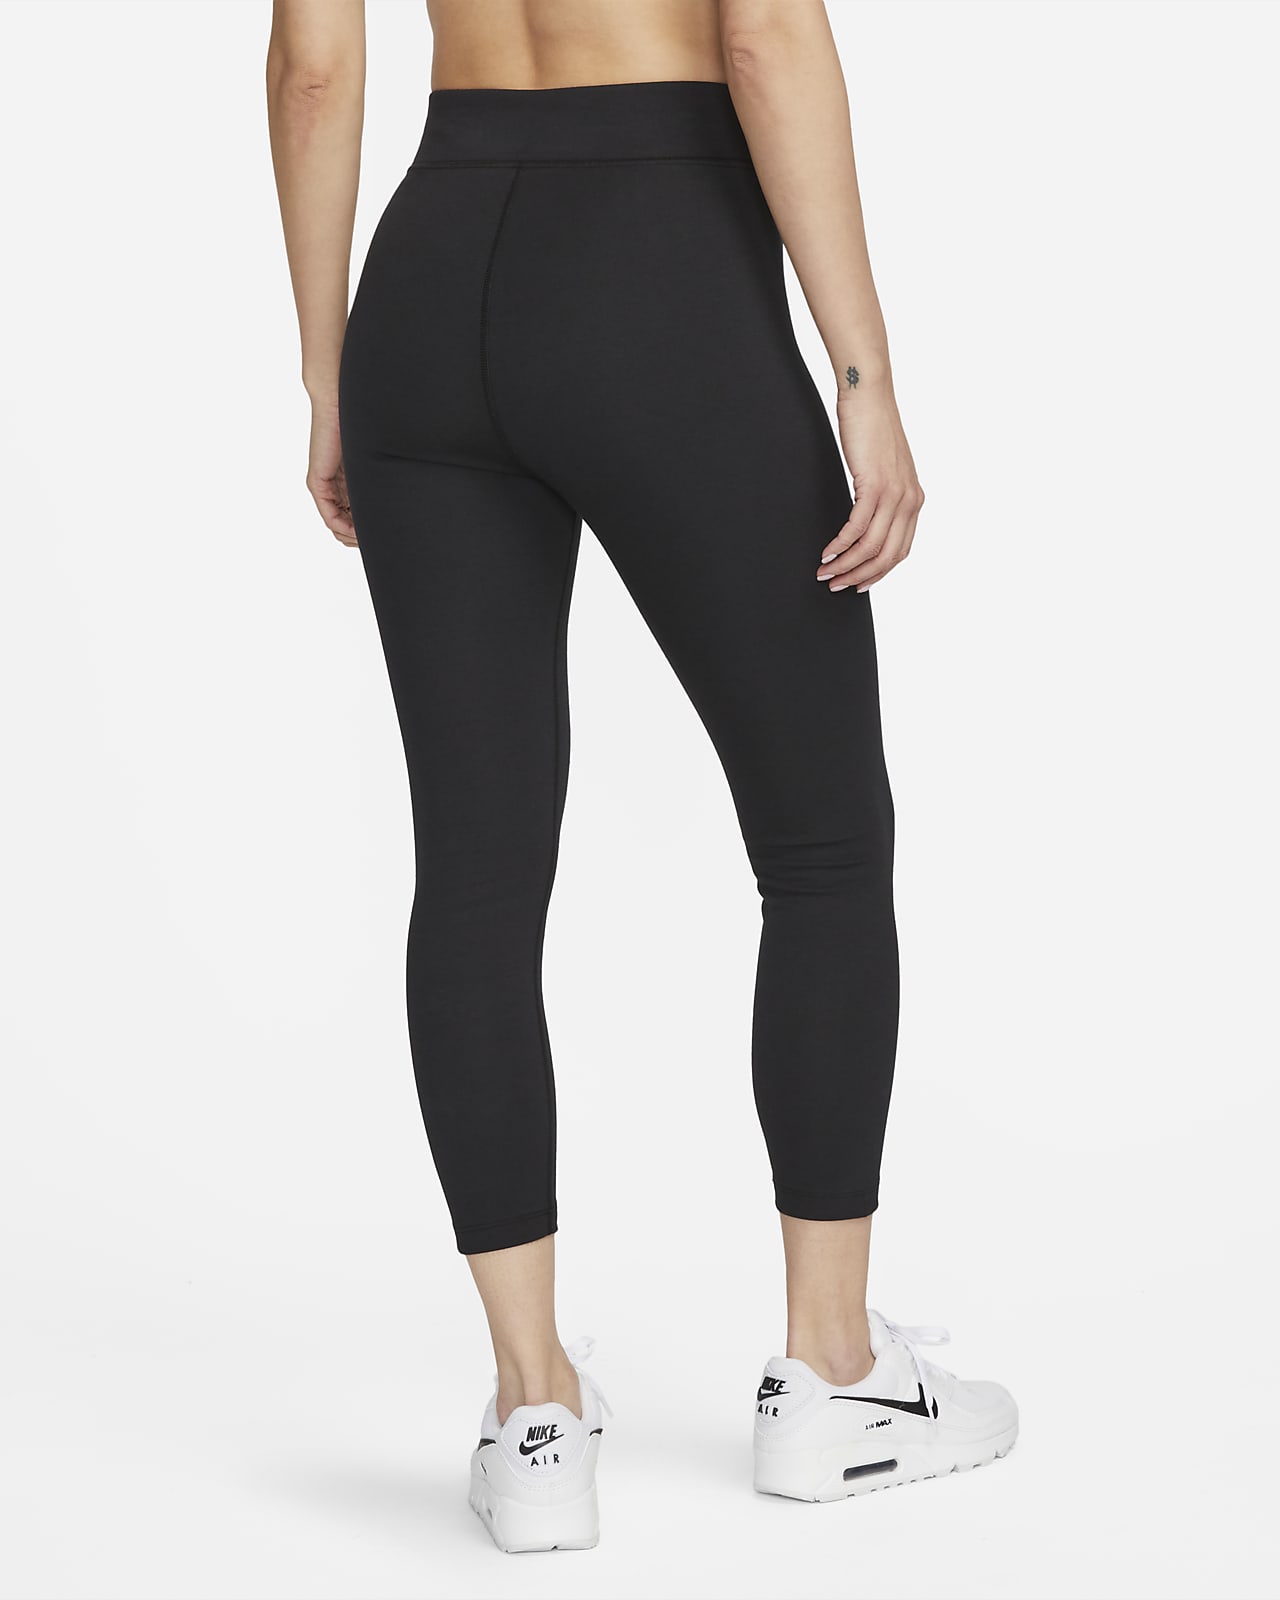 Buyr.com | Compression Pants & Tights | Nike One Women's 7/8 Tights (Black,  Large)